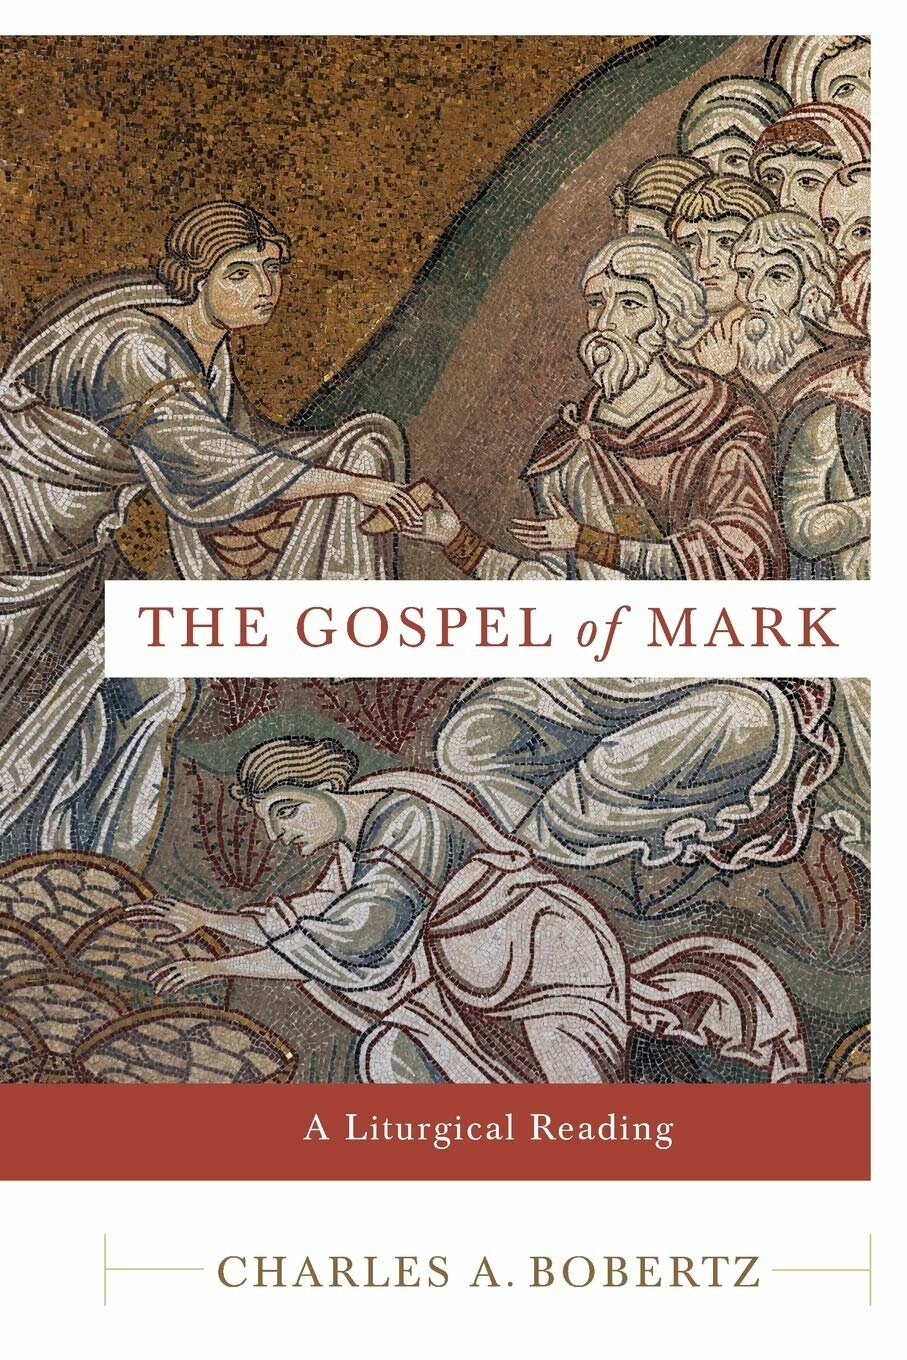 The Gospel of Mark: A Liturgical Reading